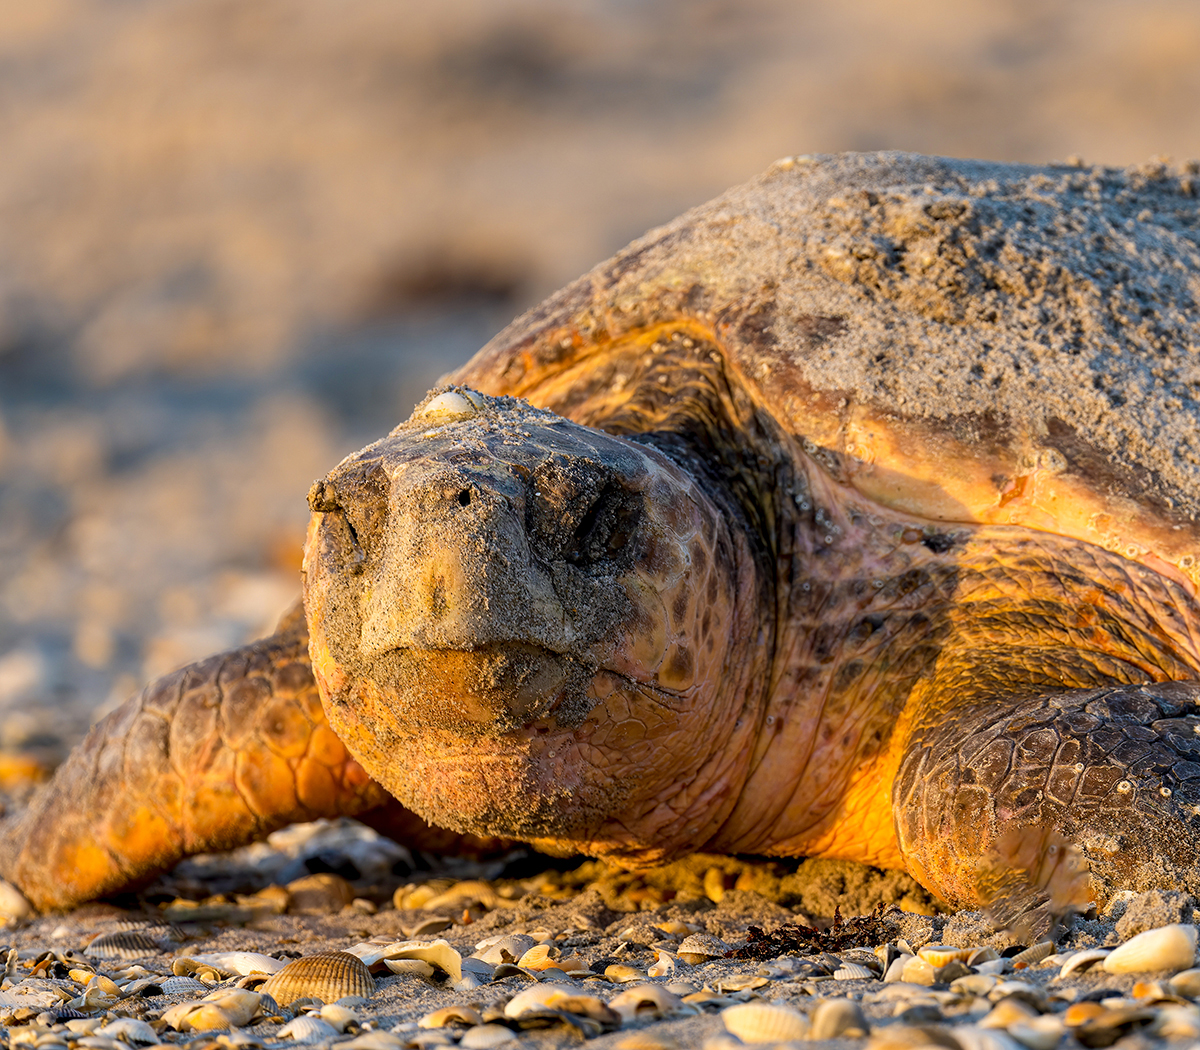 Loggerheads start arriving in April to deposit their eggs and are usually done by August and account for the majority of the Brevard nestings.